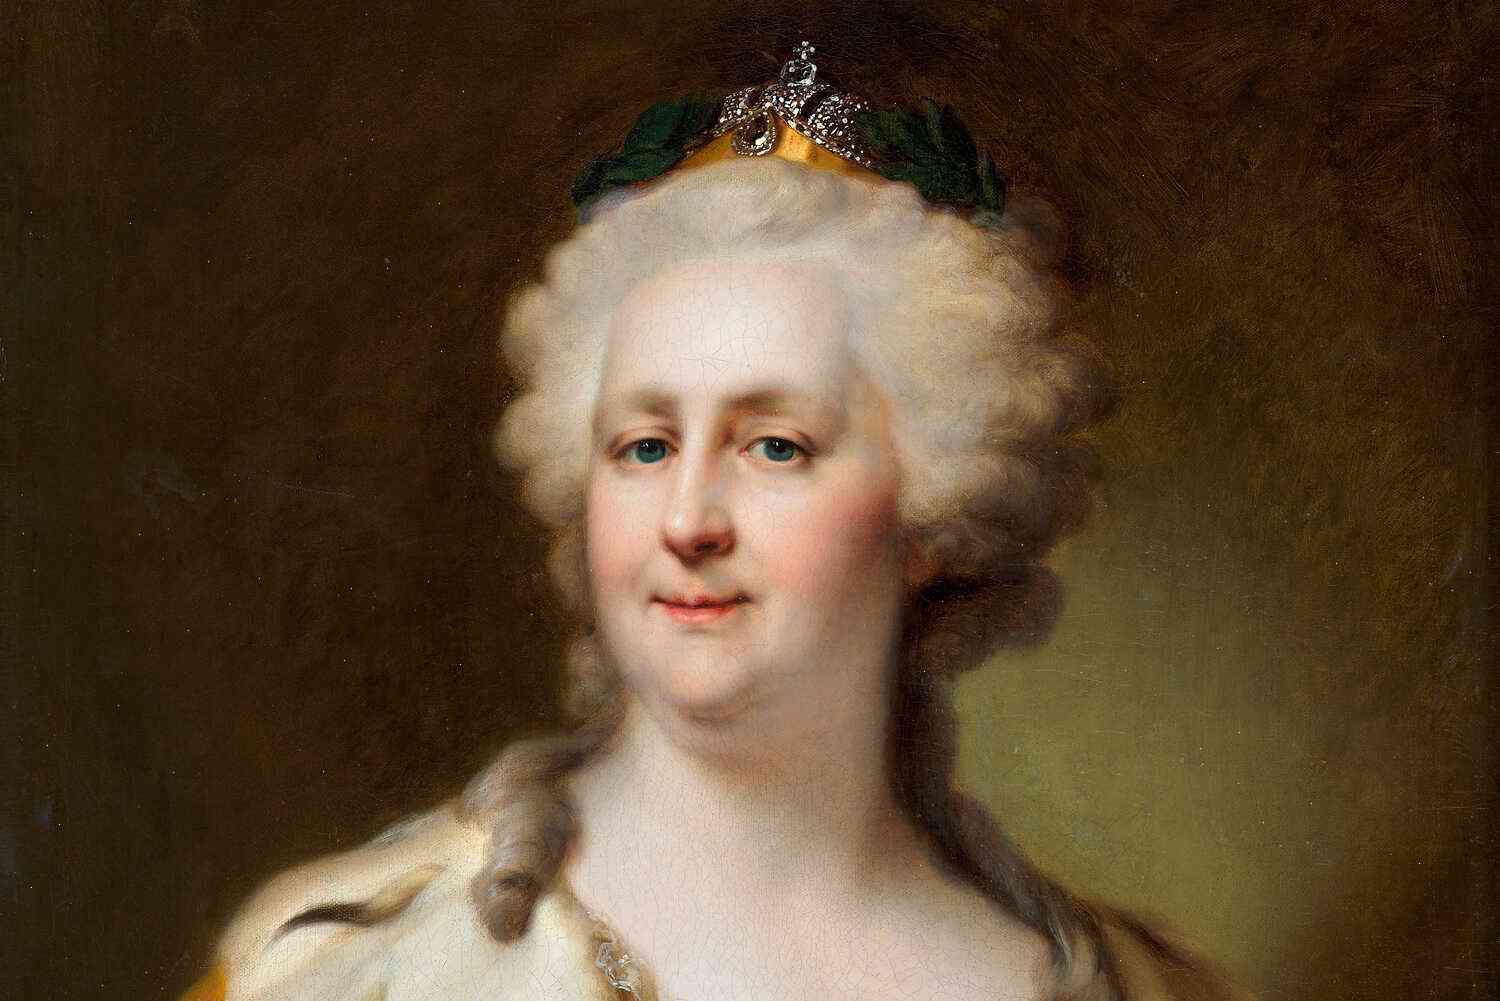 Historic letter from Catherine the Great to her grandson is up for auction